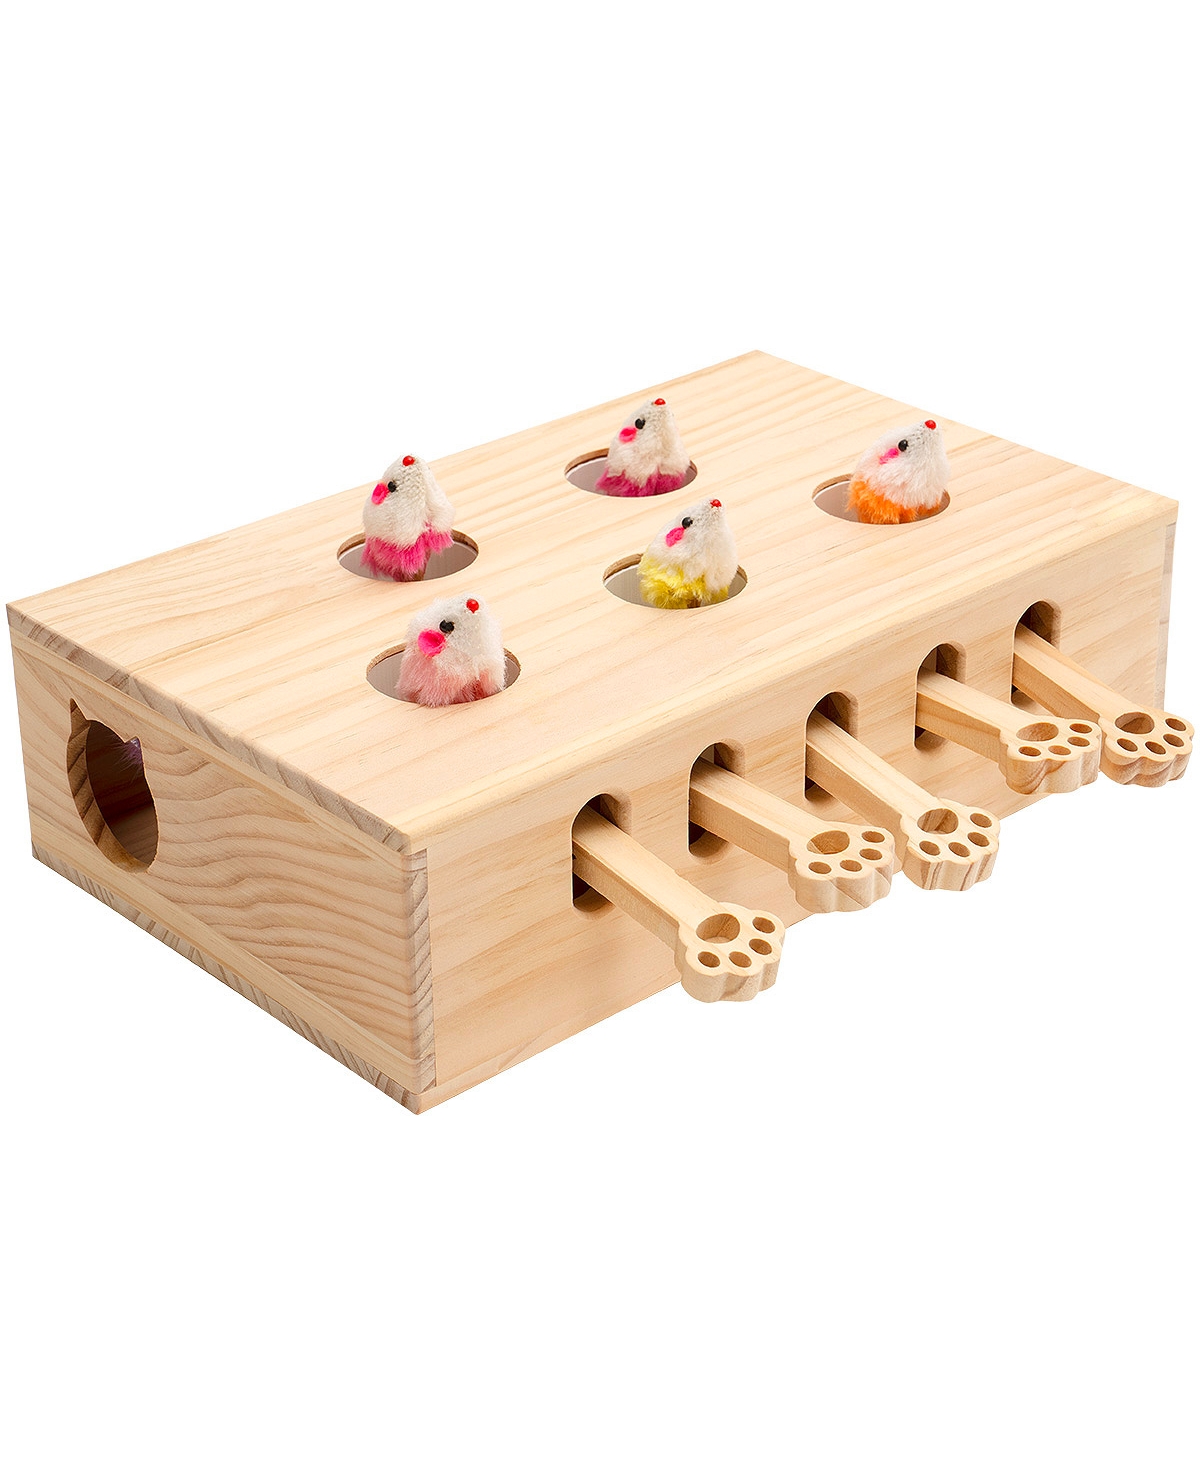 Interactive Whack-a-mole Cat Toys - Solid Wood - Indoor Cats Kitten Catch Mice Game - Wood